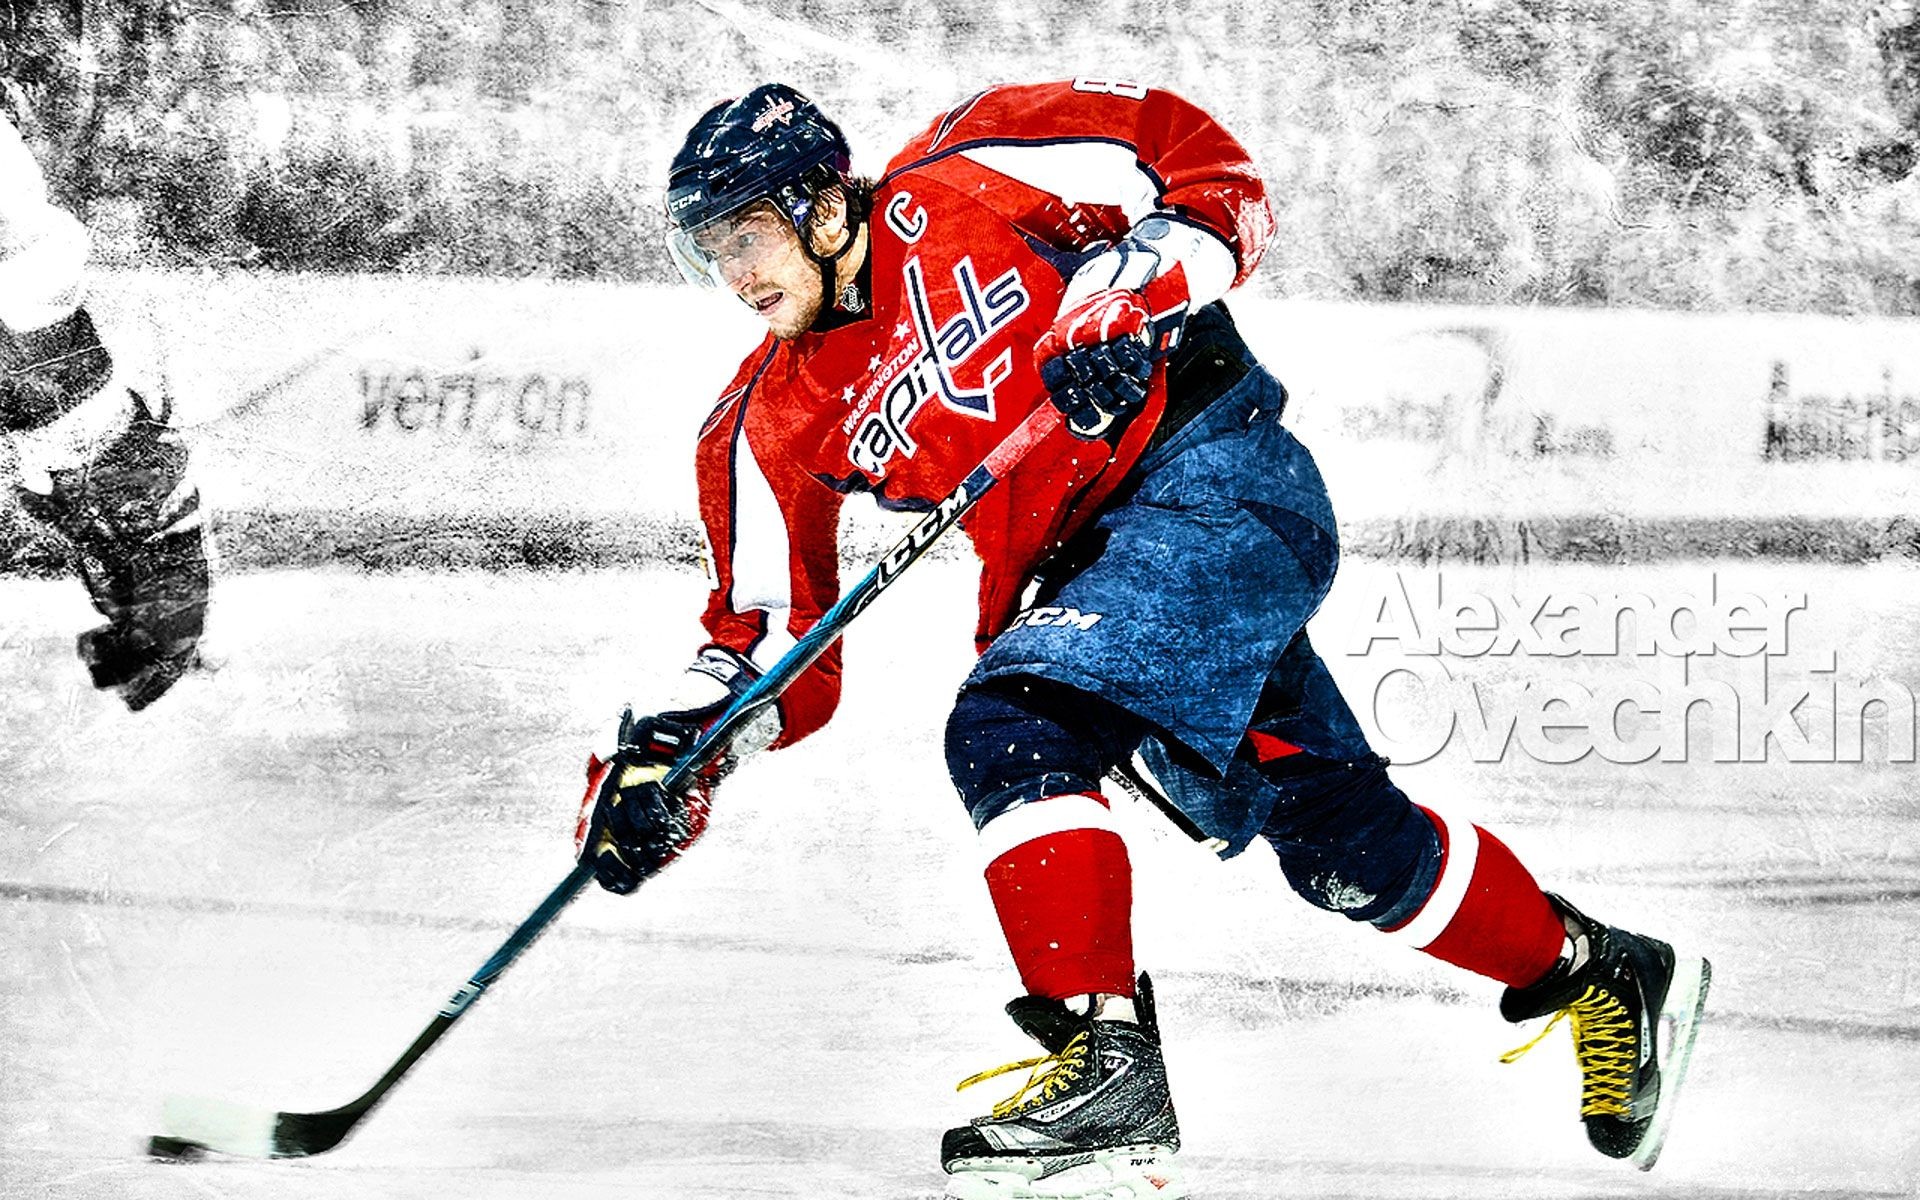 Alexander Ovechkin Wallpapers (26+ images inside)